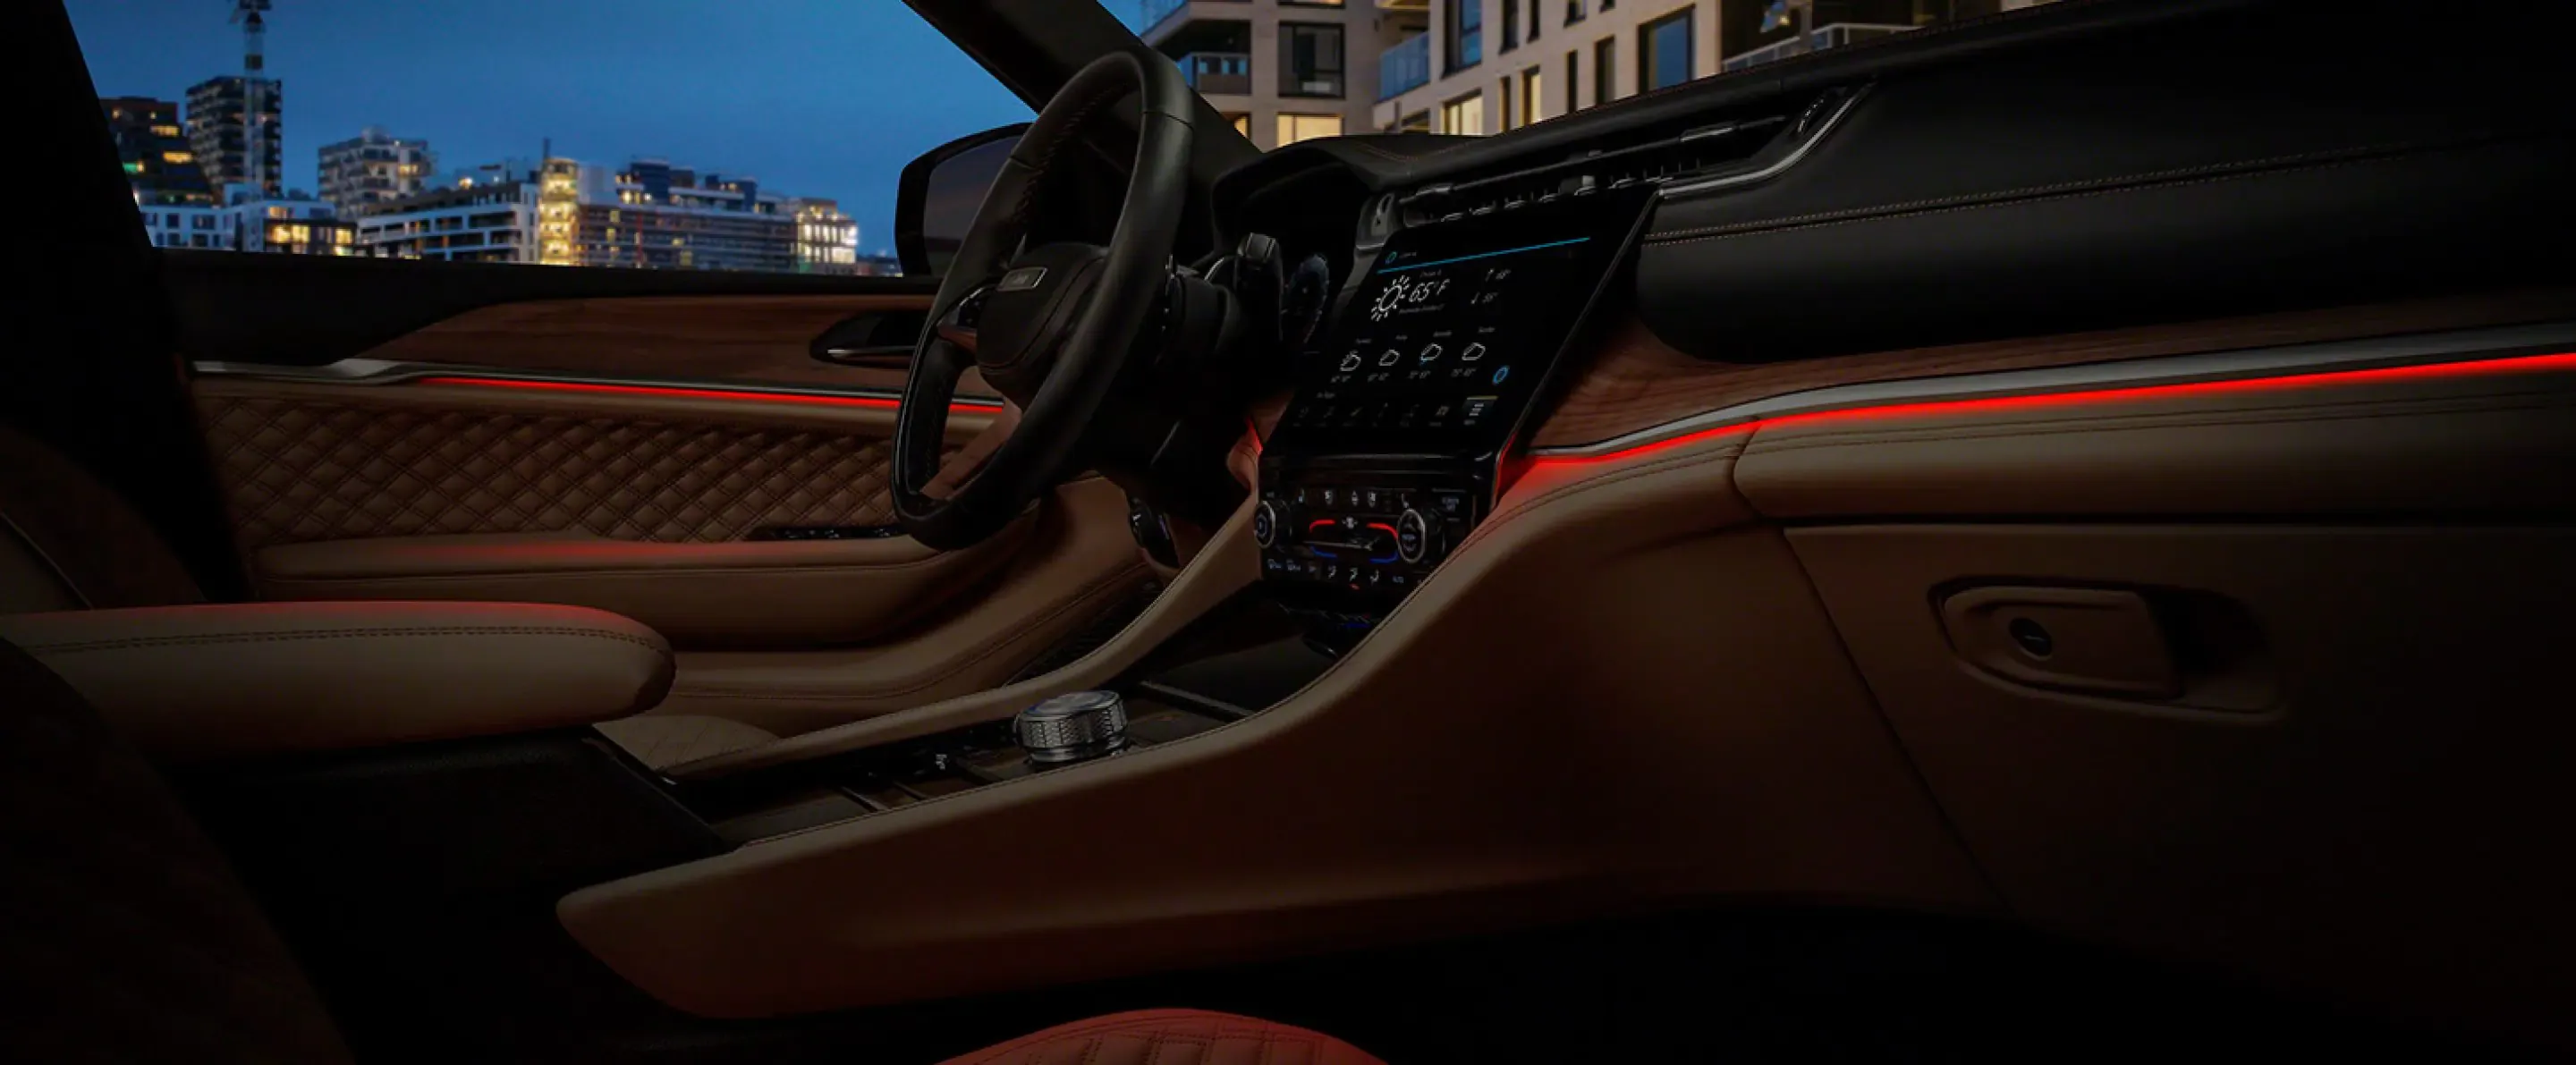 2022-All-New-Grand-Cherokee-Interior-Ambient-LED-Lighting